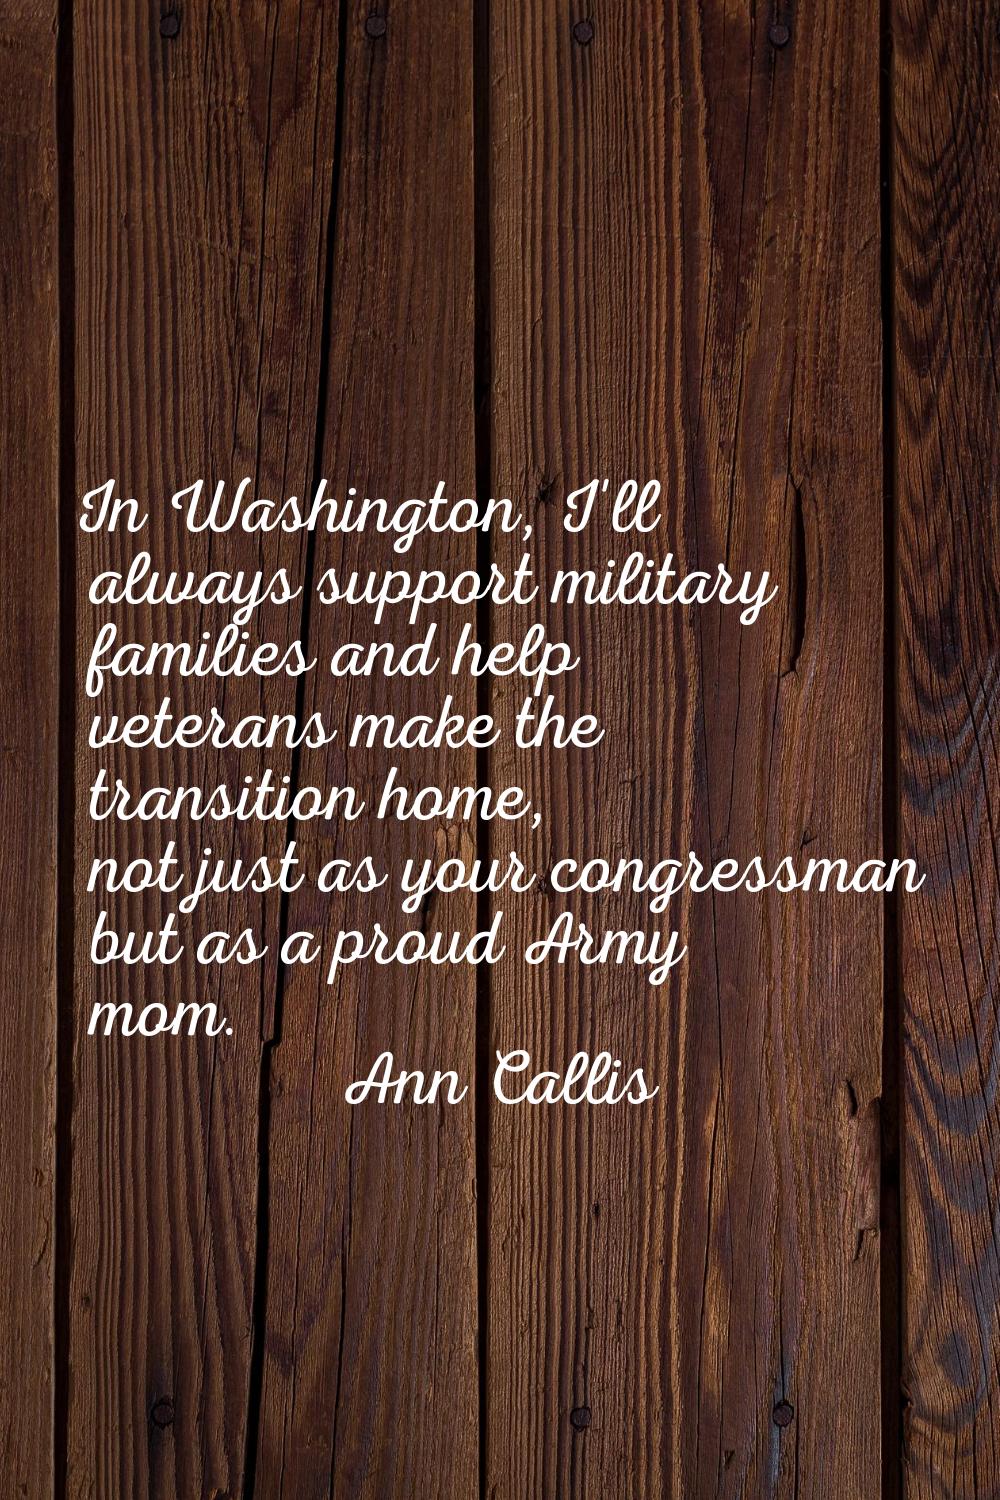 In Washington, I'll always support military families and help veterans make the transition home, no